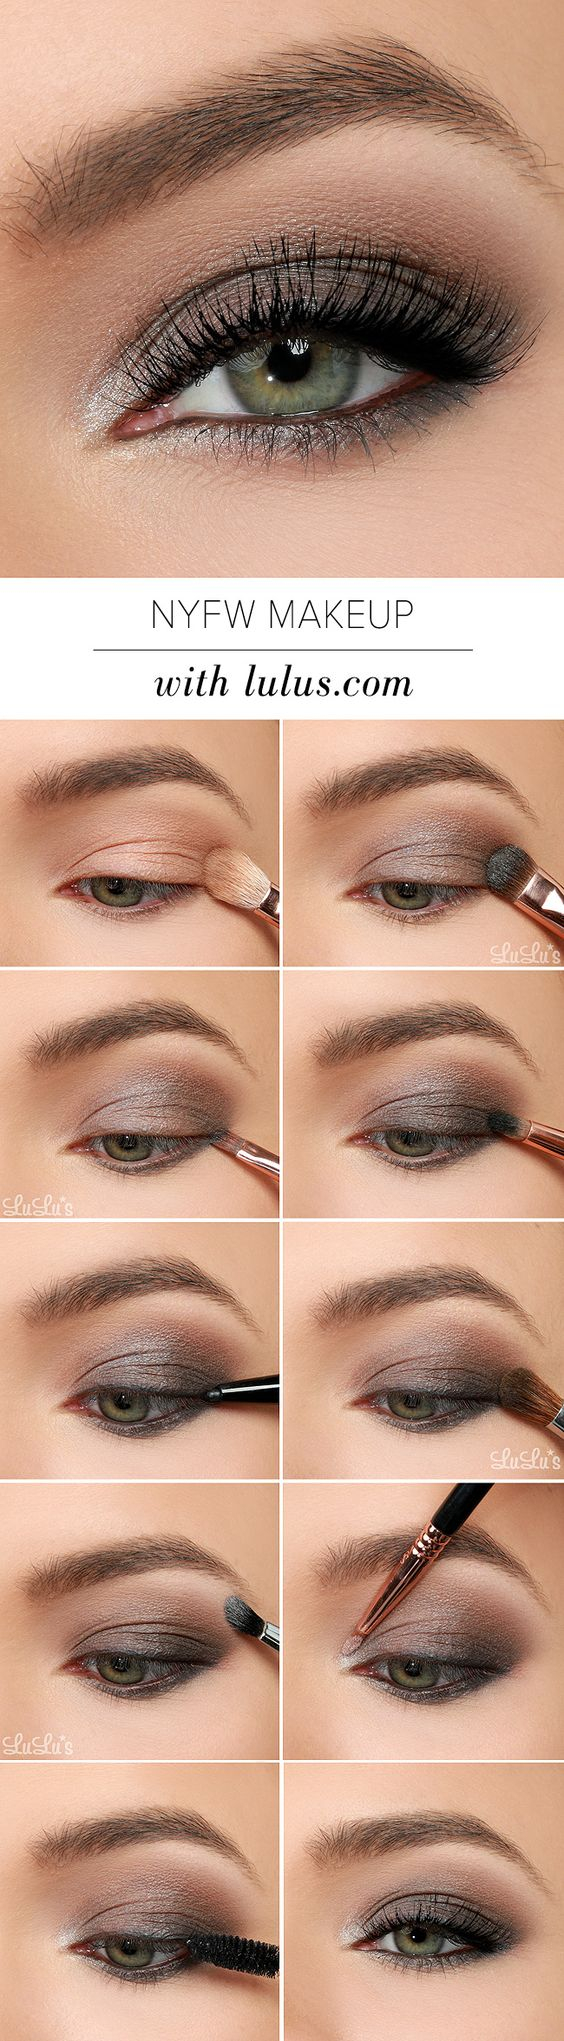 Natural Eye Makeup For Green Eyes 10 Great Eye Makeup Looks For Green Eyes Styles Weekly